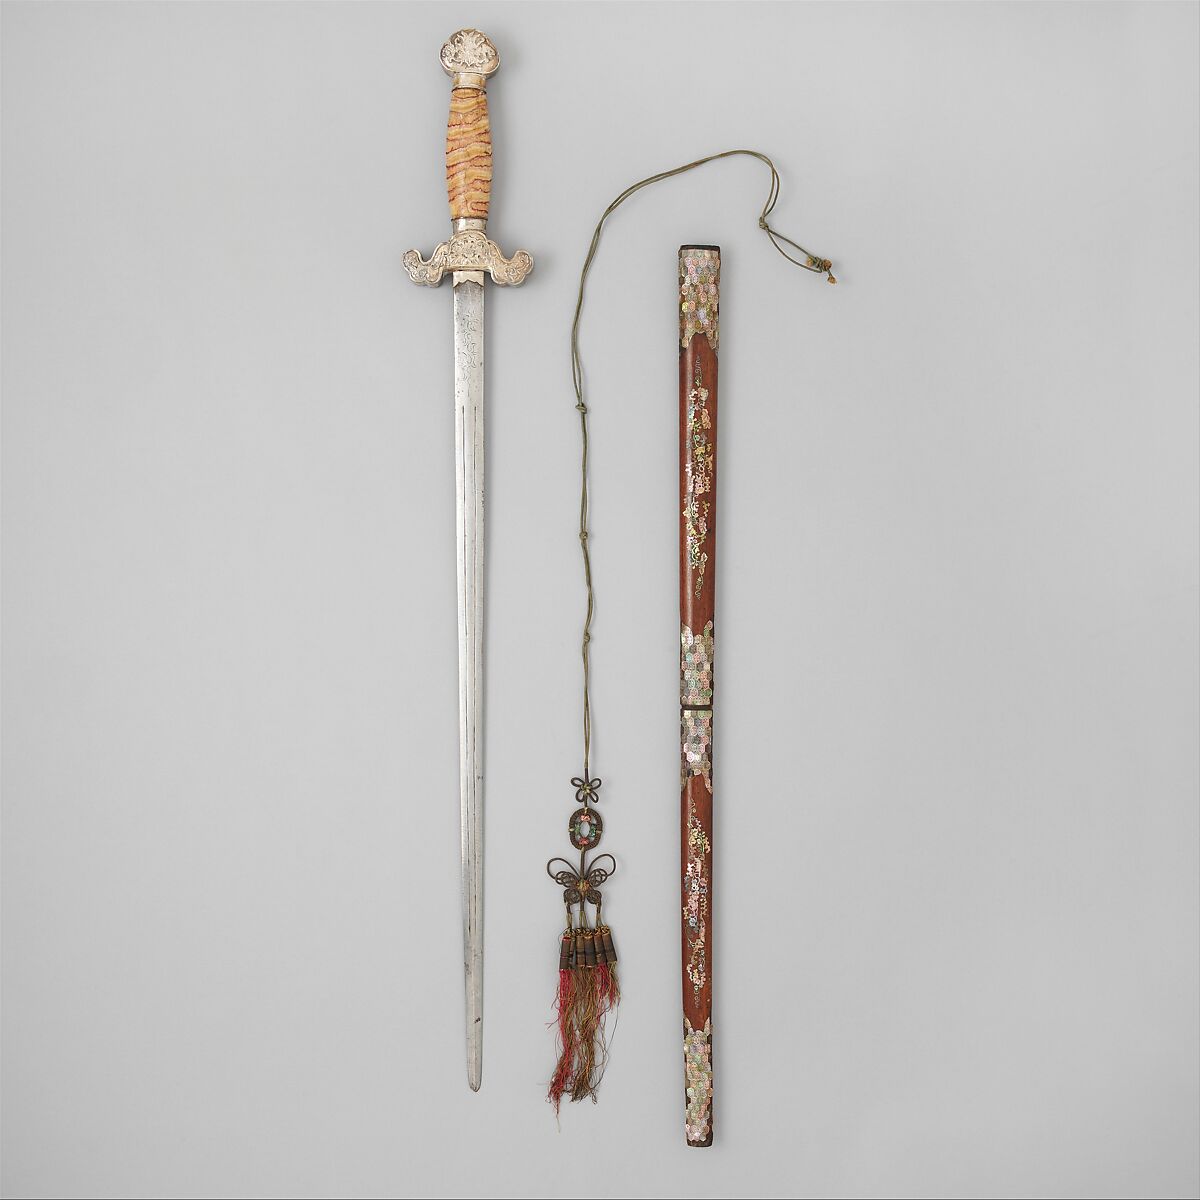 Sword with Scabbard, Steel, ivory (elephant's tooth), silver, pearl shell, wood, probably Chinese or Vietnamese 